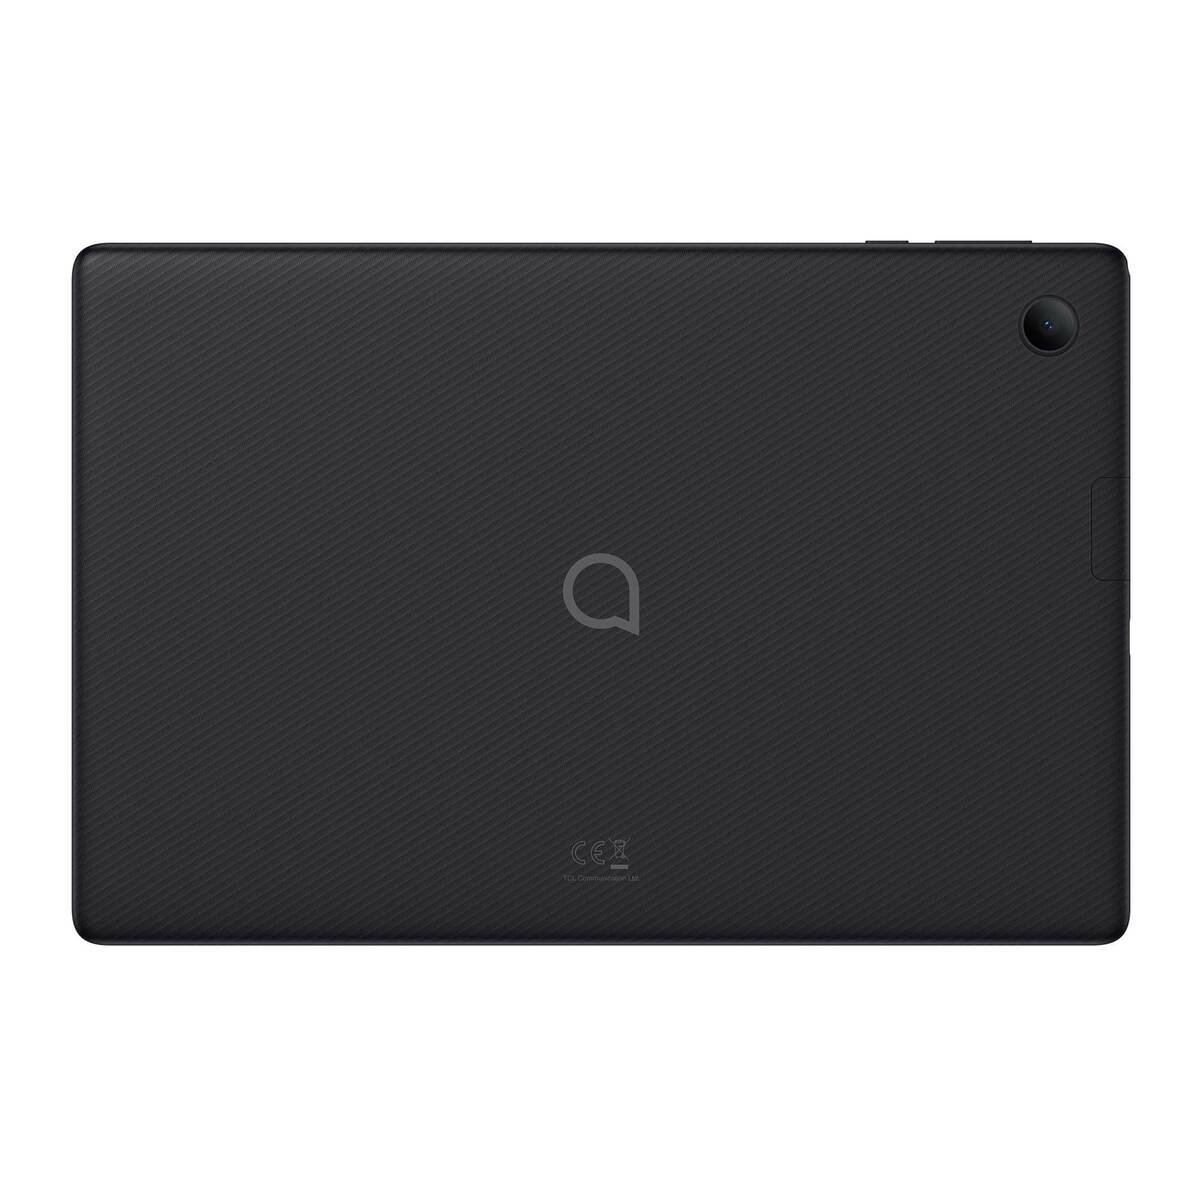 Alcatel Tablet 1T 10 8092, WiFi, Quad-core, 2GB RAM, 32GB Memory, 10 inches Display, Android, Black